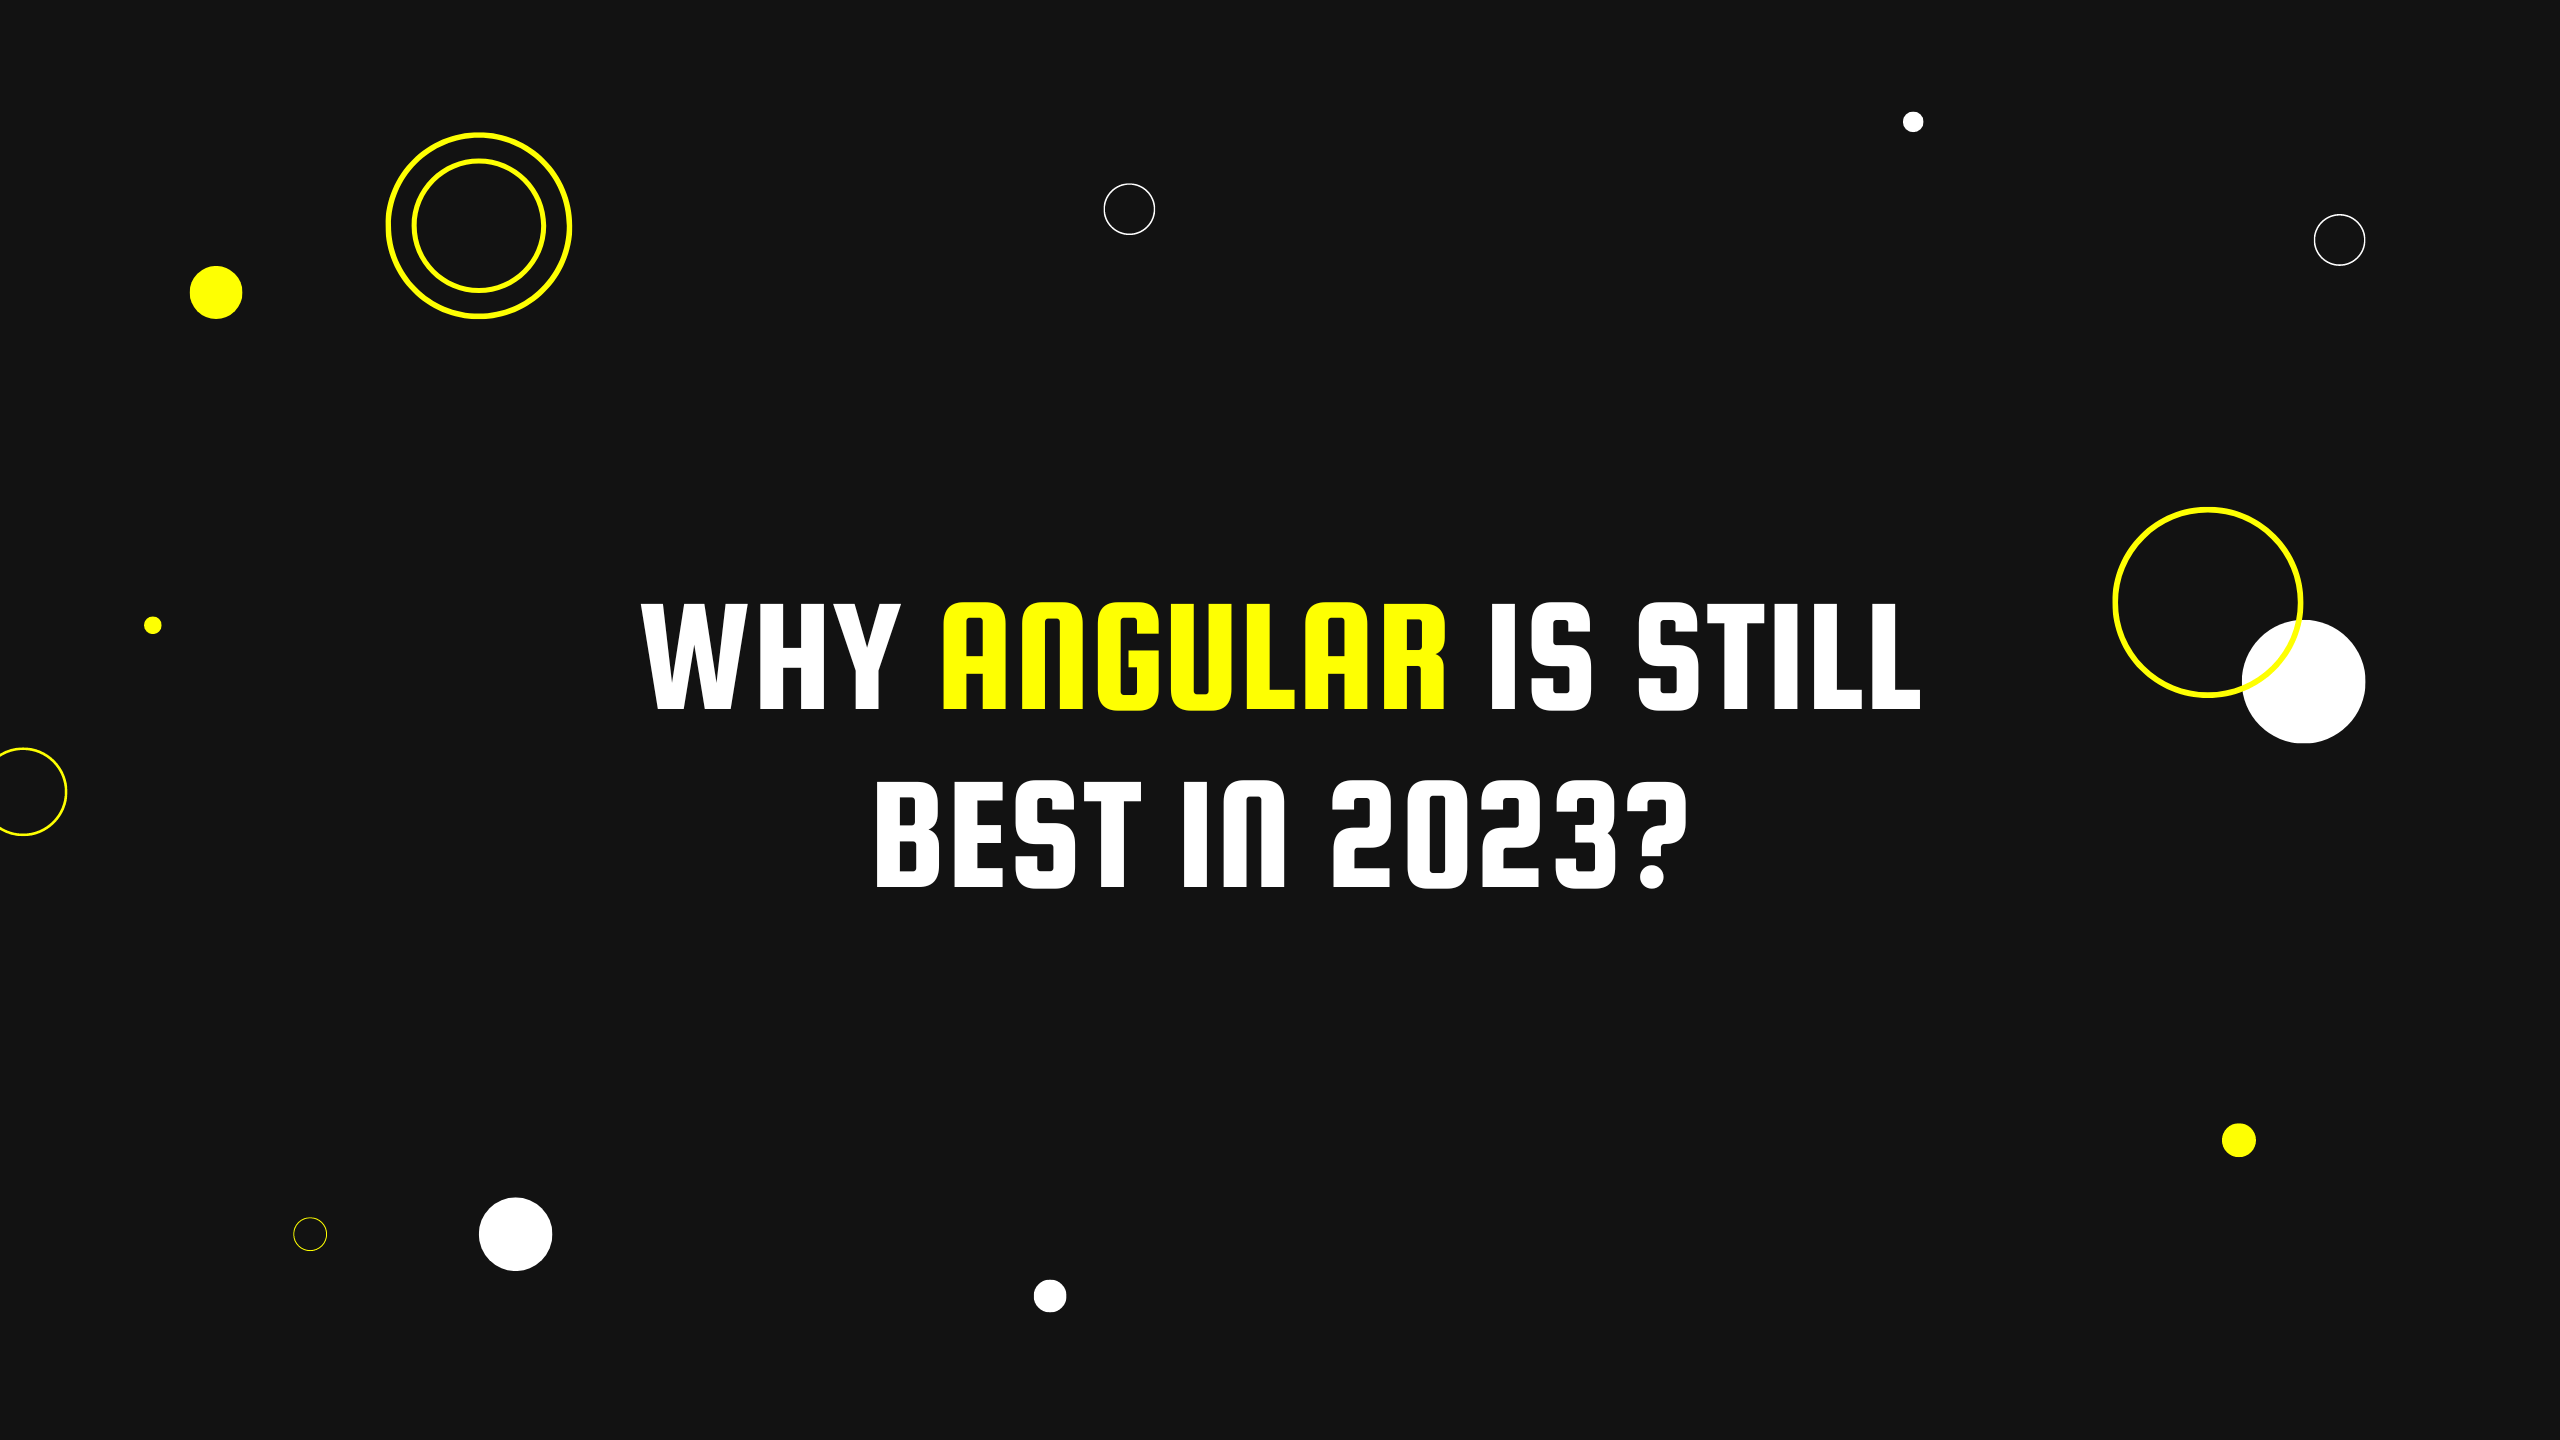 Why Angular is still the Best Choice for Enterprise Web Development in 2023